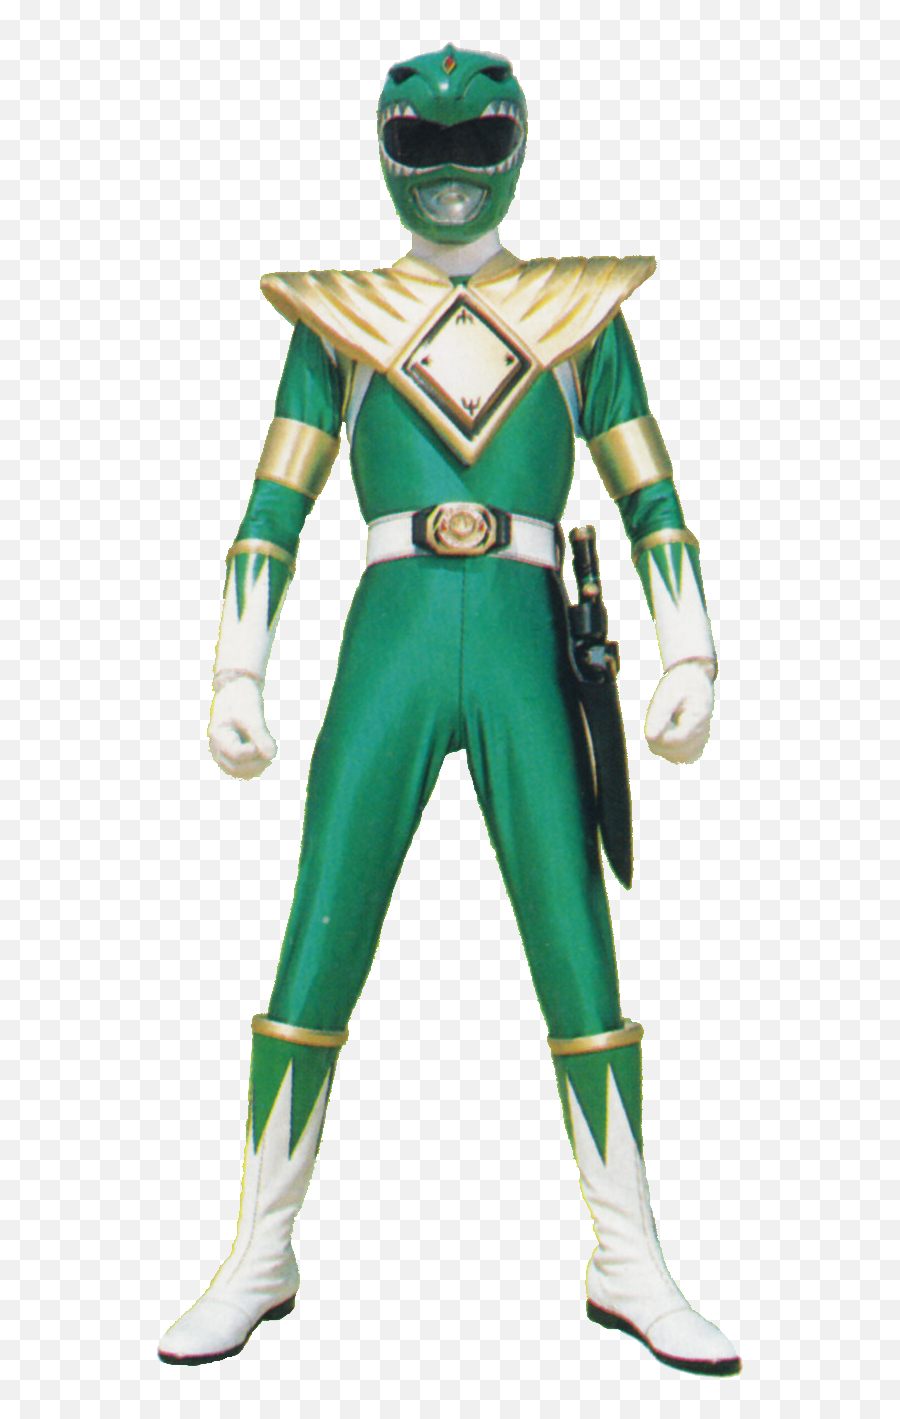 Free Power Ranger Png Download Free - Mighty Morphin Power Ranger Verde Emoji,Power Ranger Text Emoticon